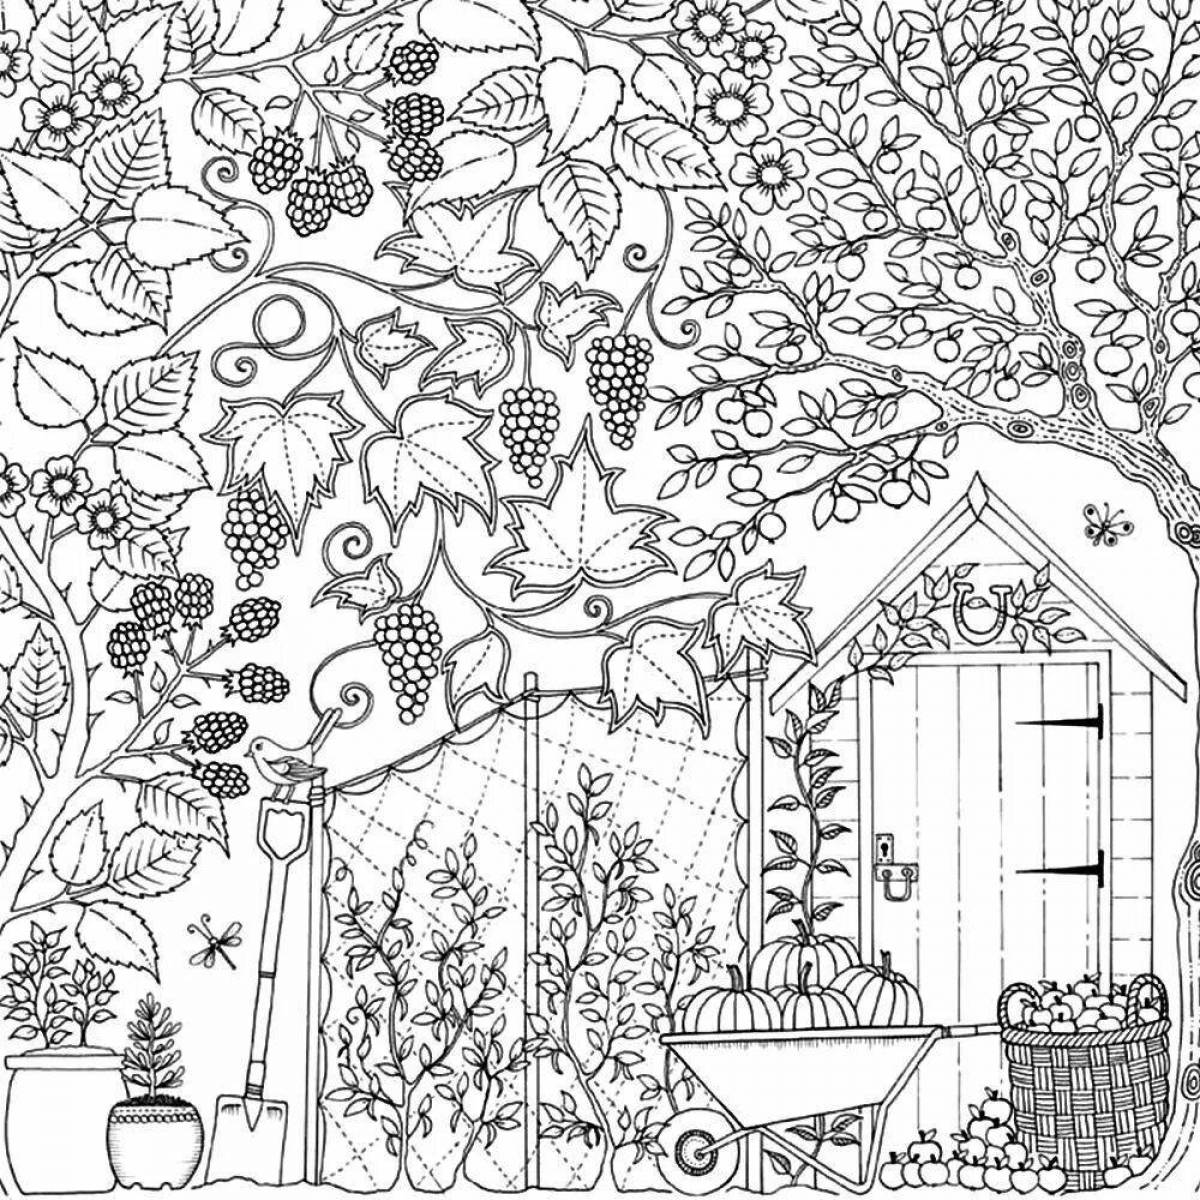 Charming garden coloring page